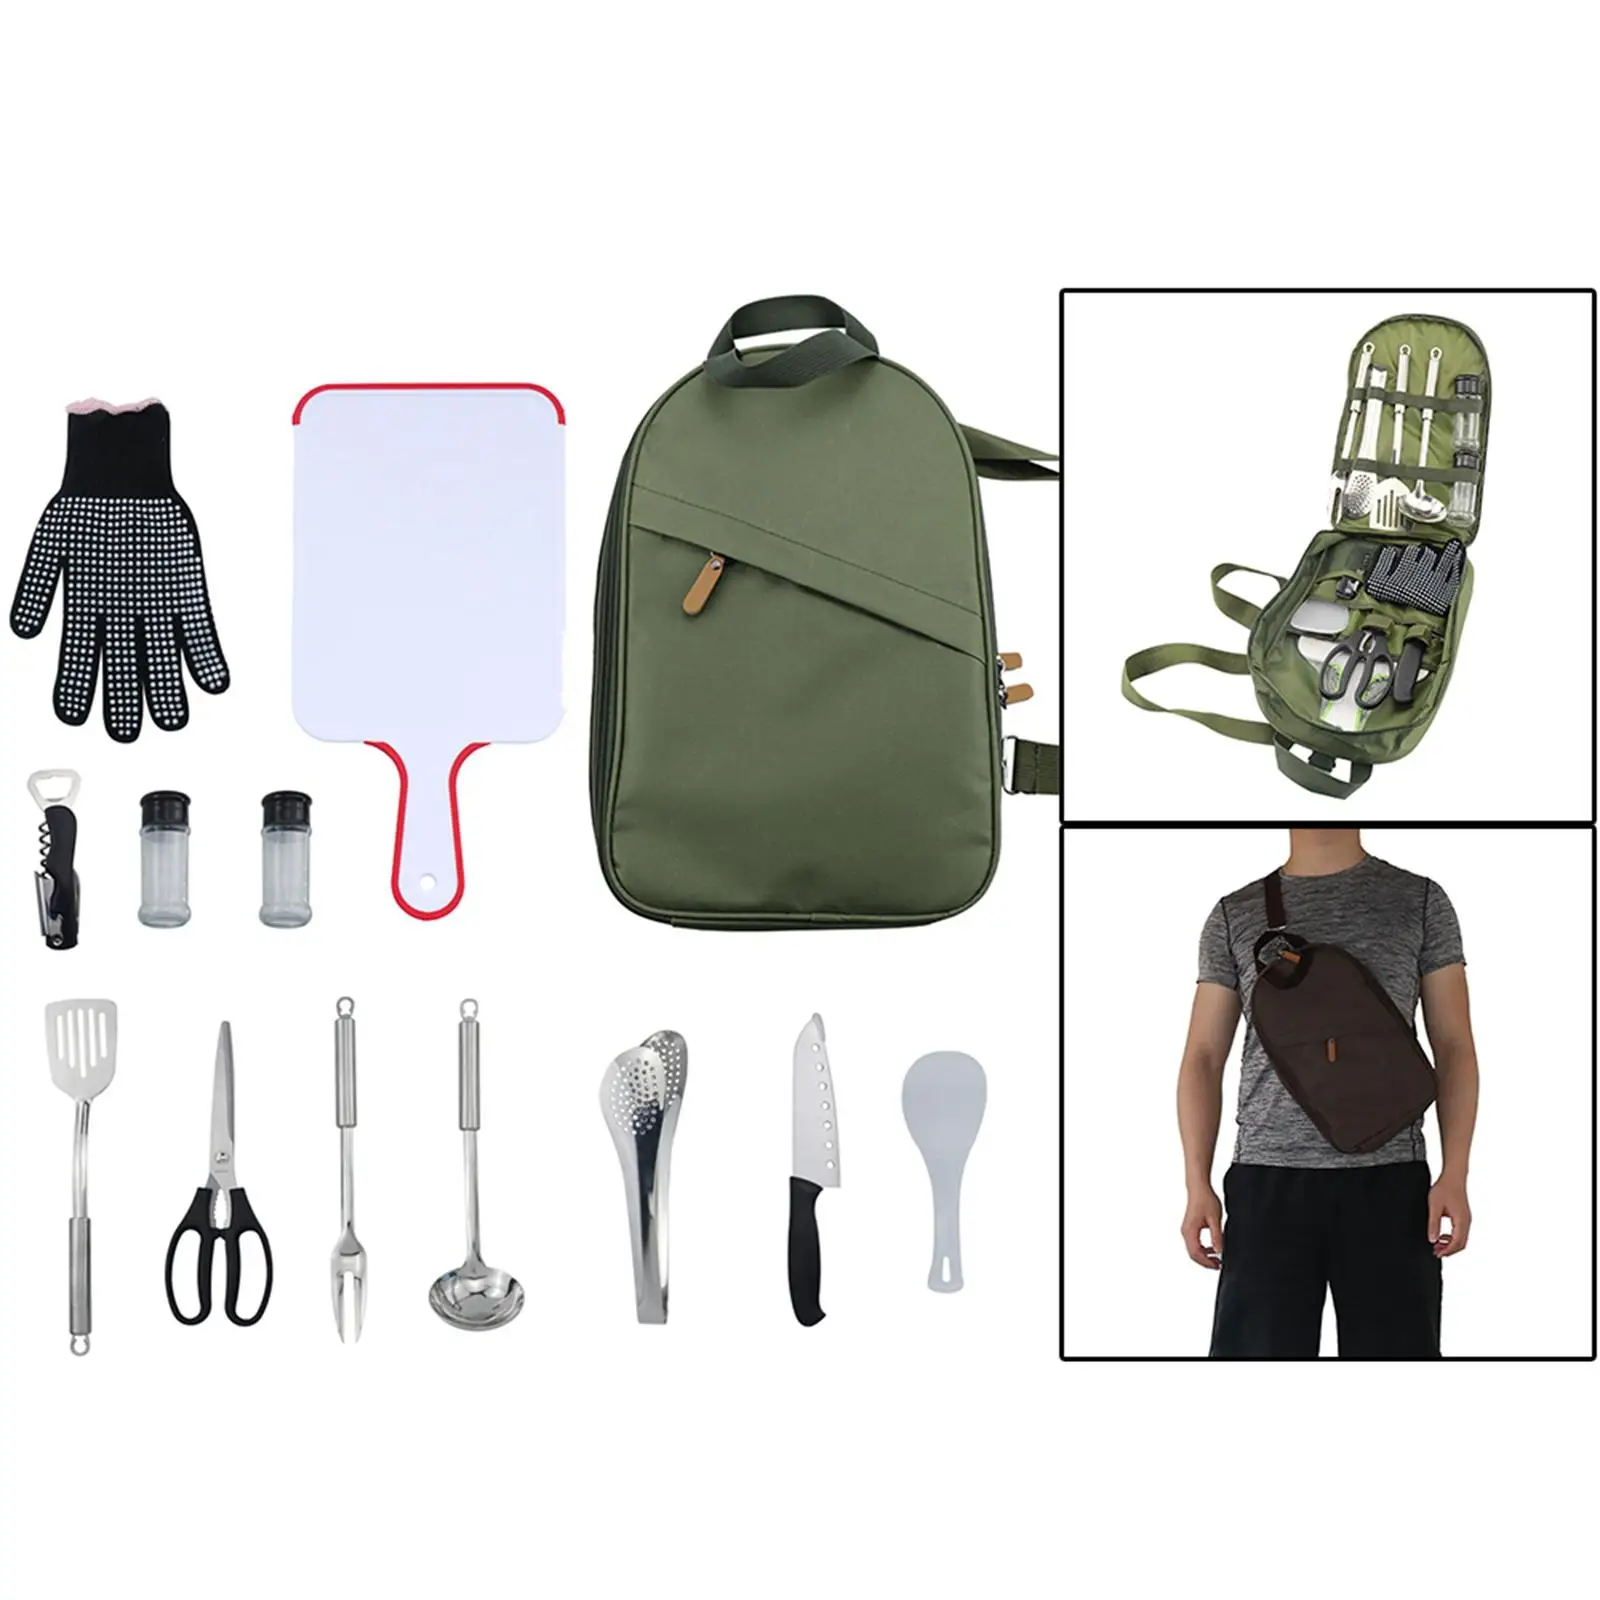 Portable Camping Kitchen Cooking Utensil Set 12 Pieces for Outdoor BBQ Backpacking Fishing